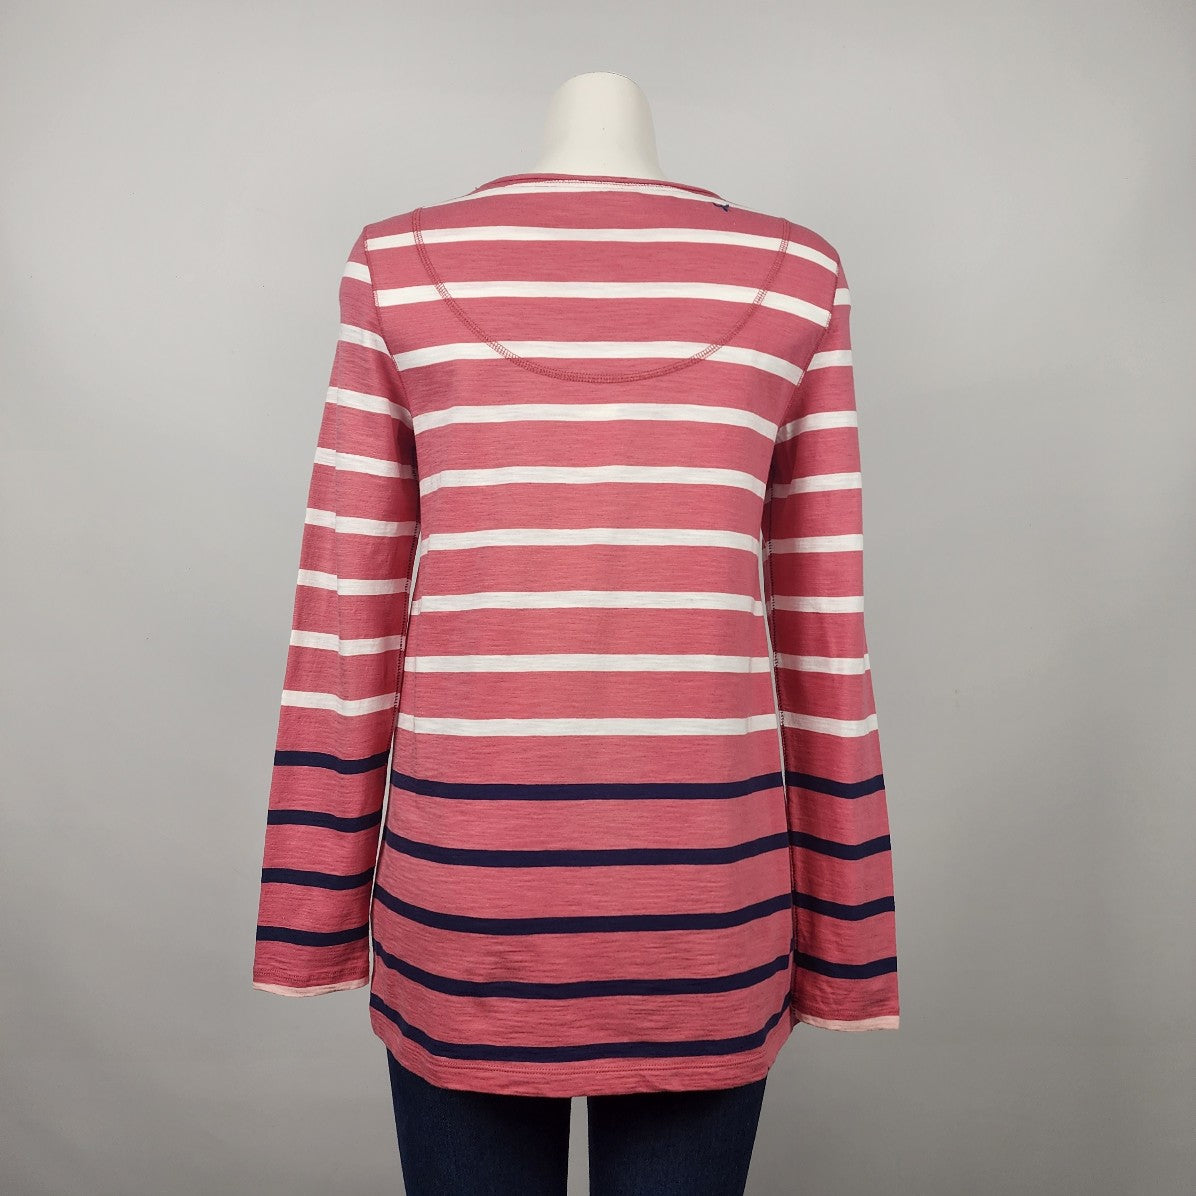 White Stuff Red Cotton Striped Front Pocket Long Sleeve Top Size 8